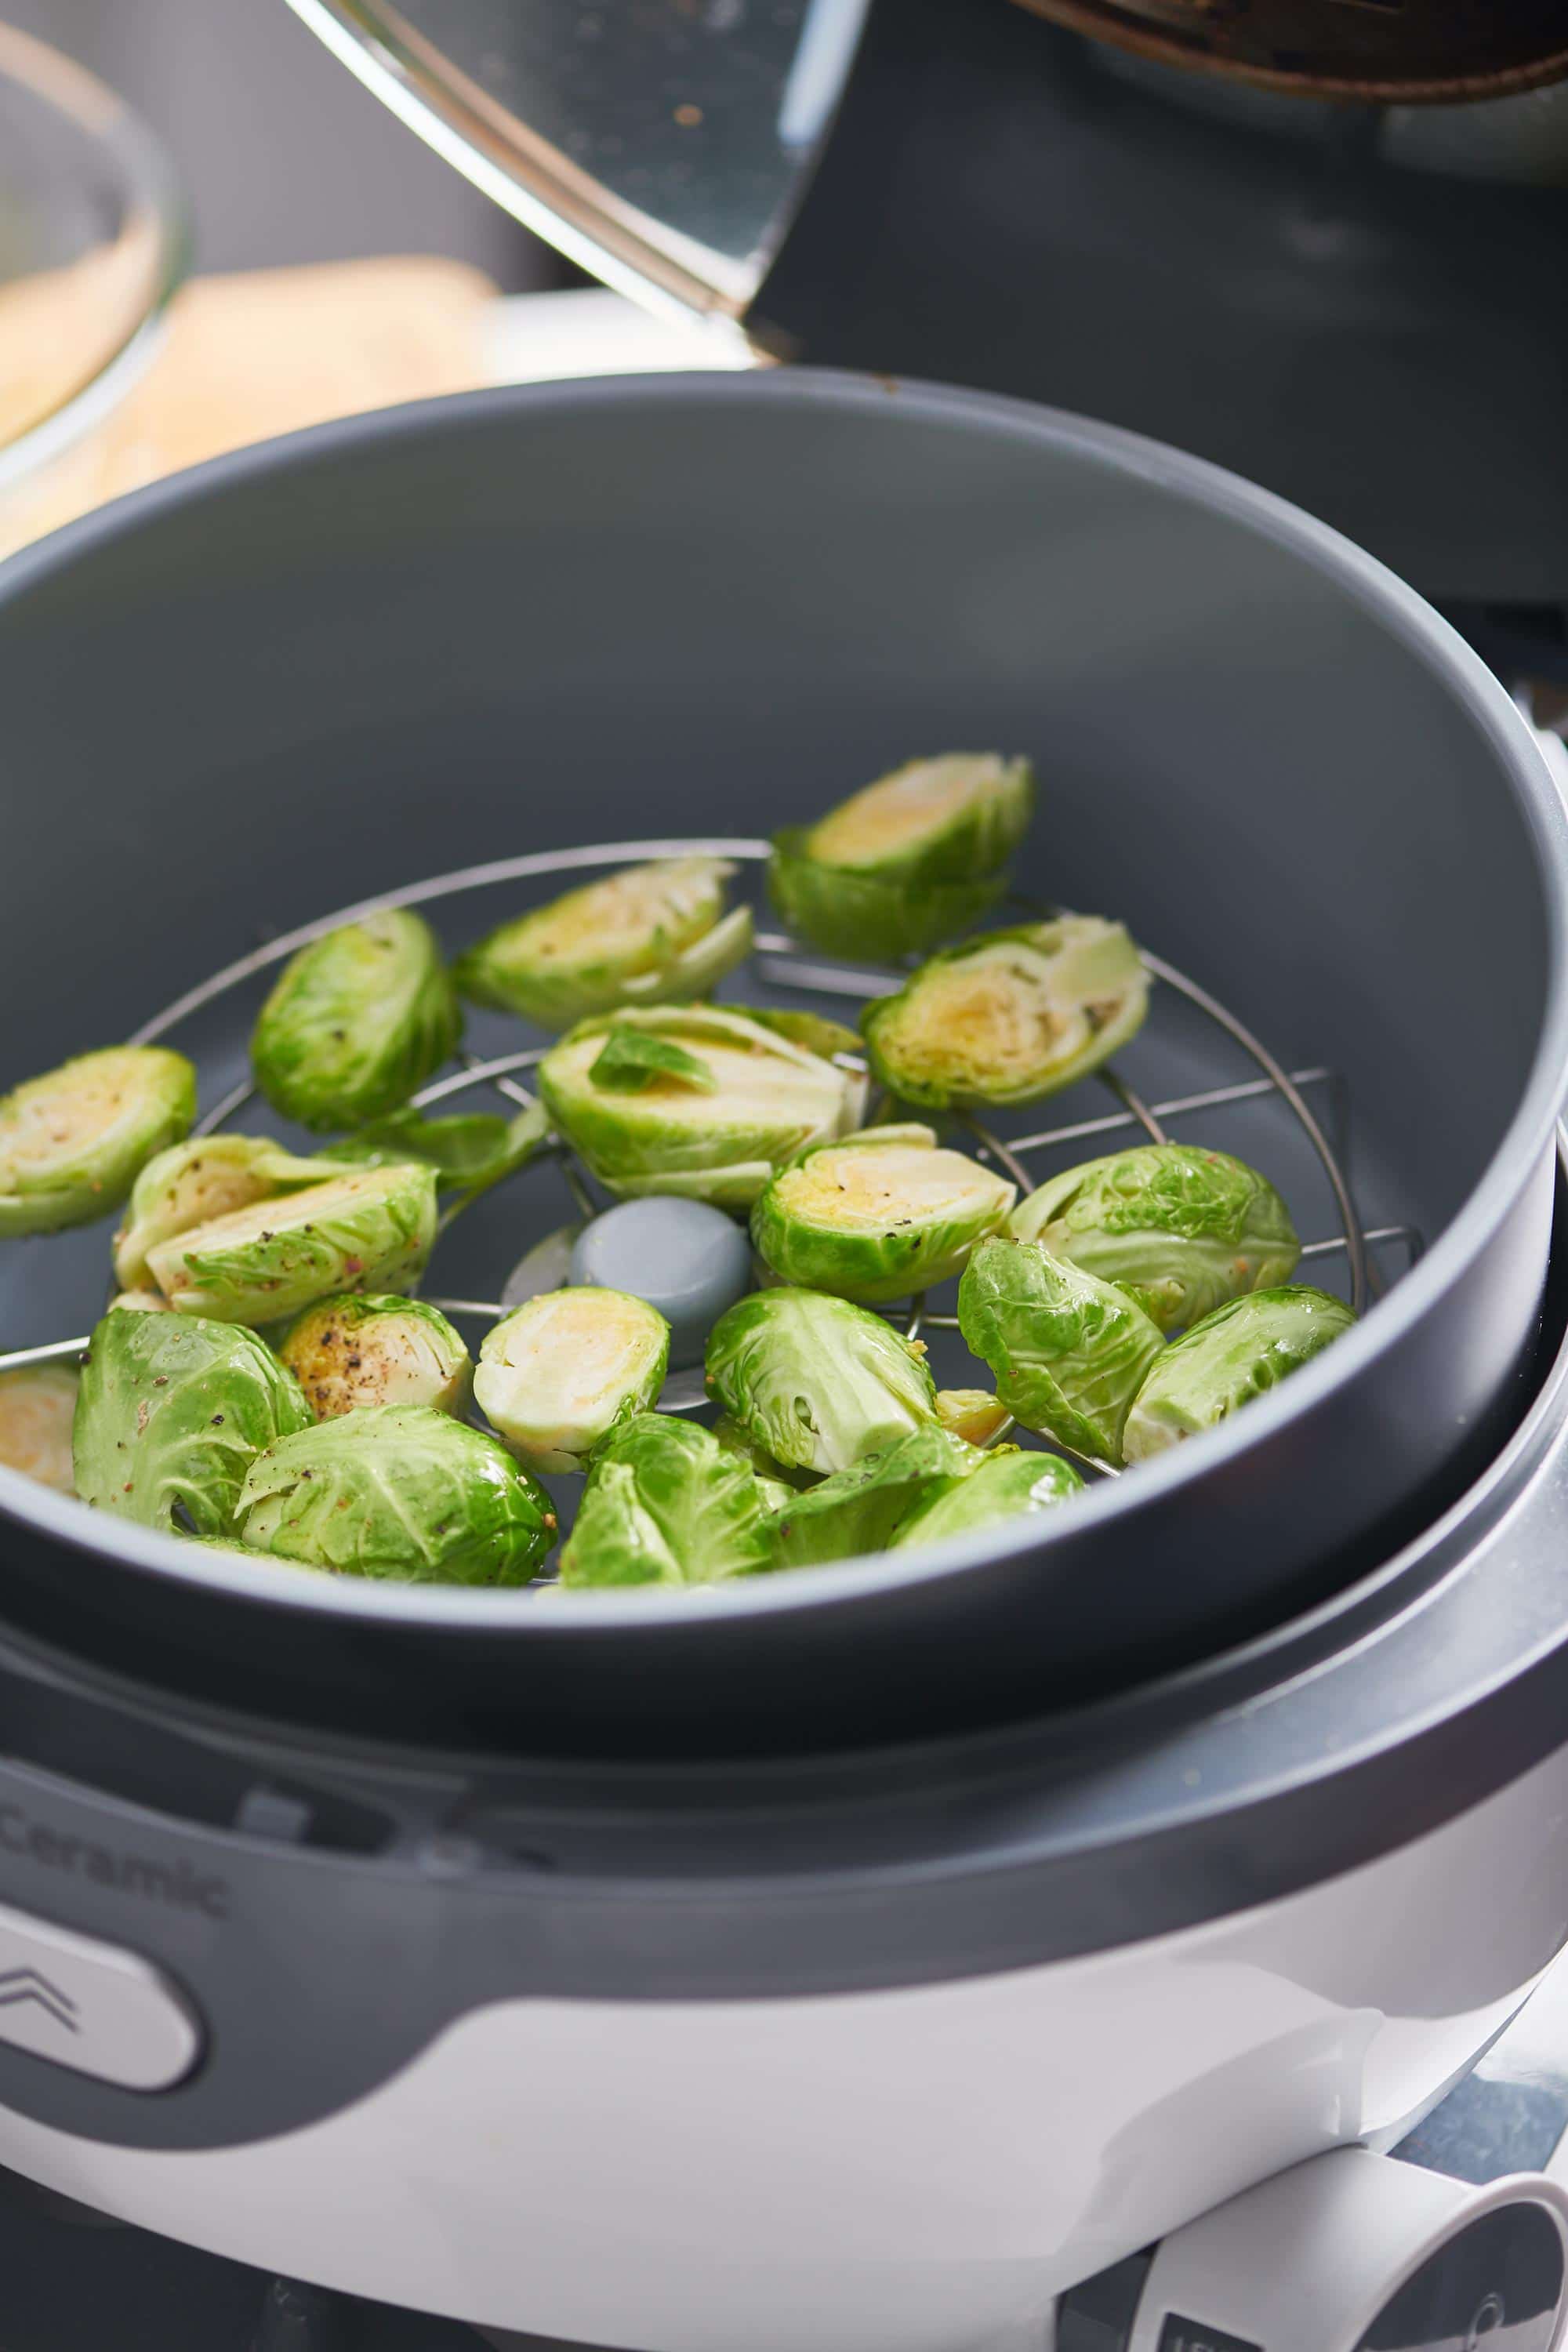 Fresh Brussels sprouts in an air fryer.